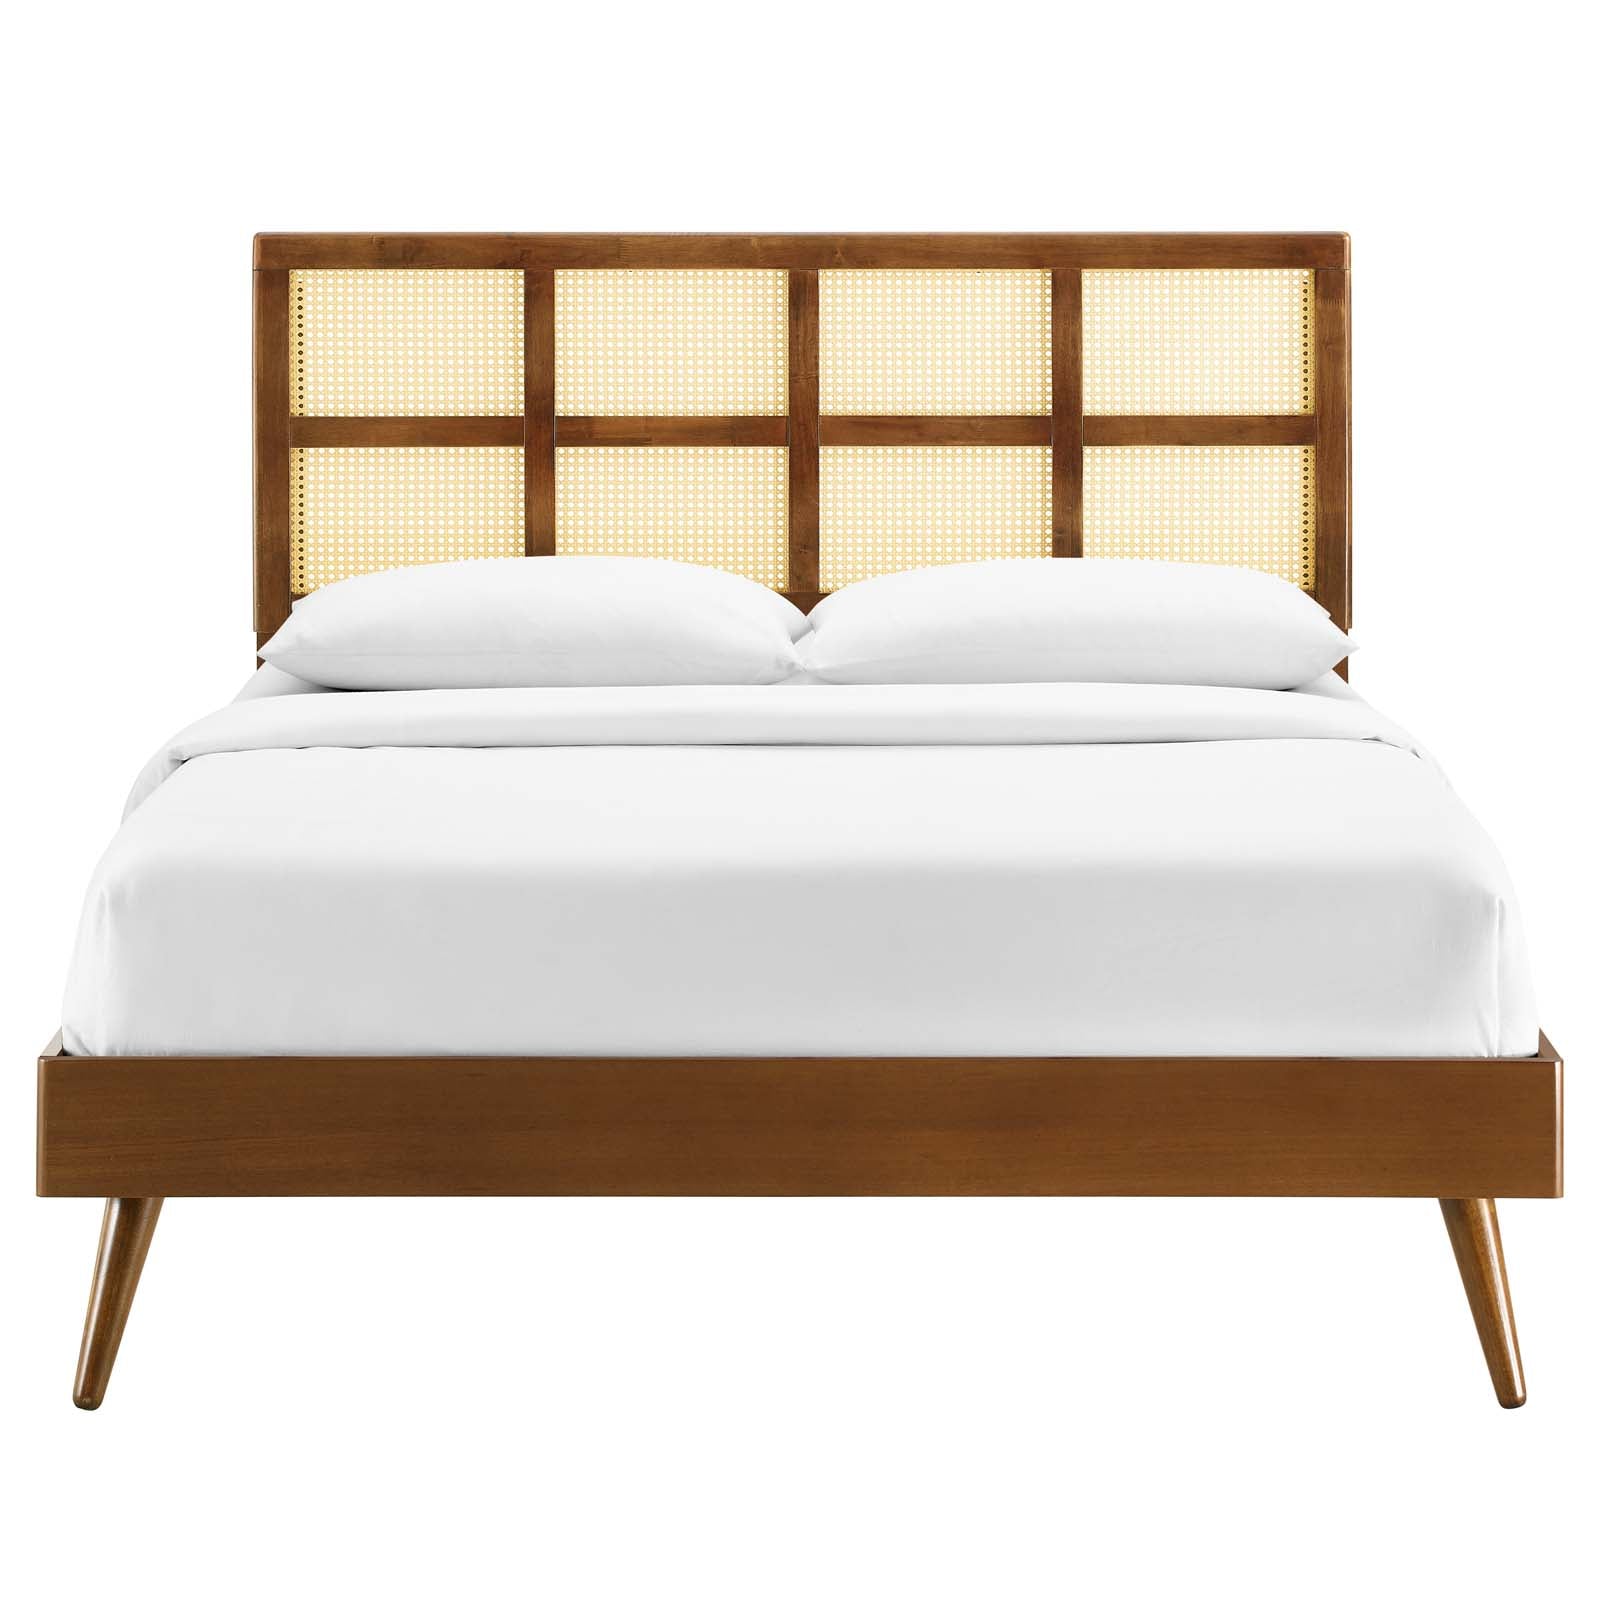 Modway Beds - Sidney Cane and Wood Full Platform Bed With Splayed Legs Walnut